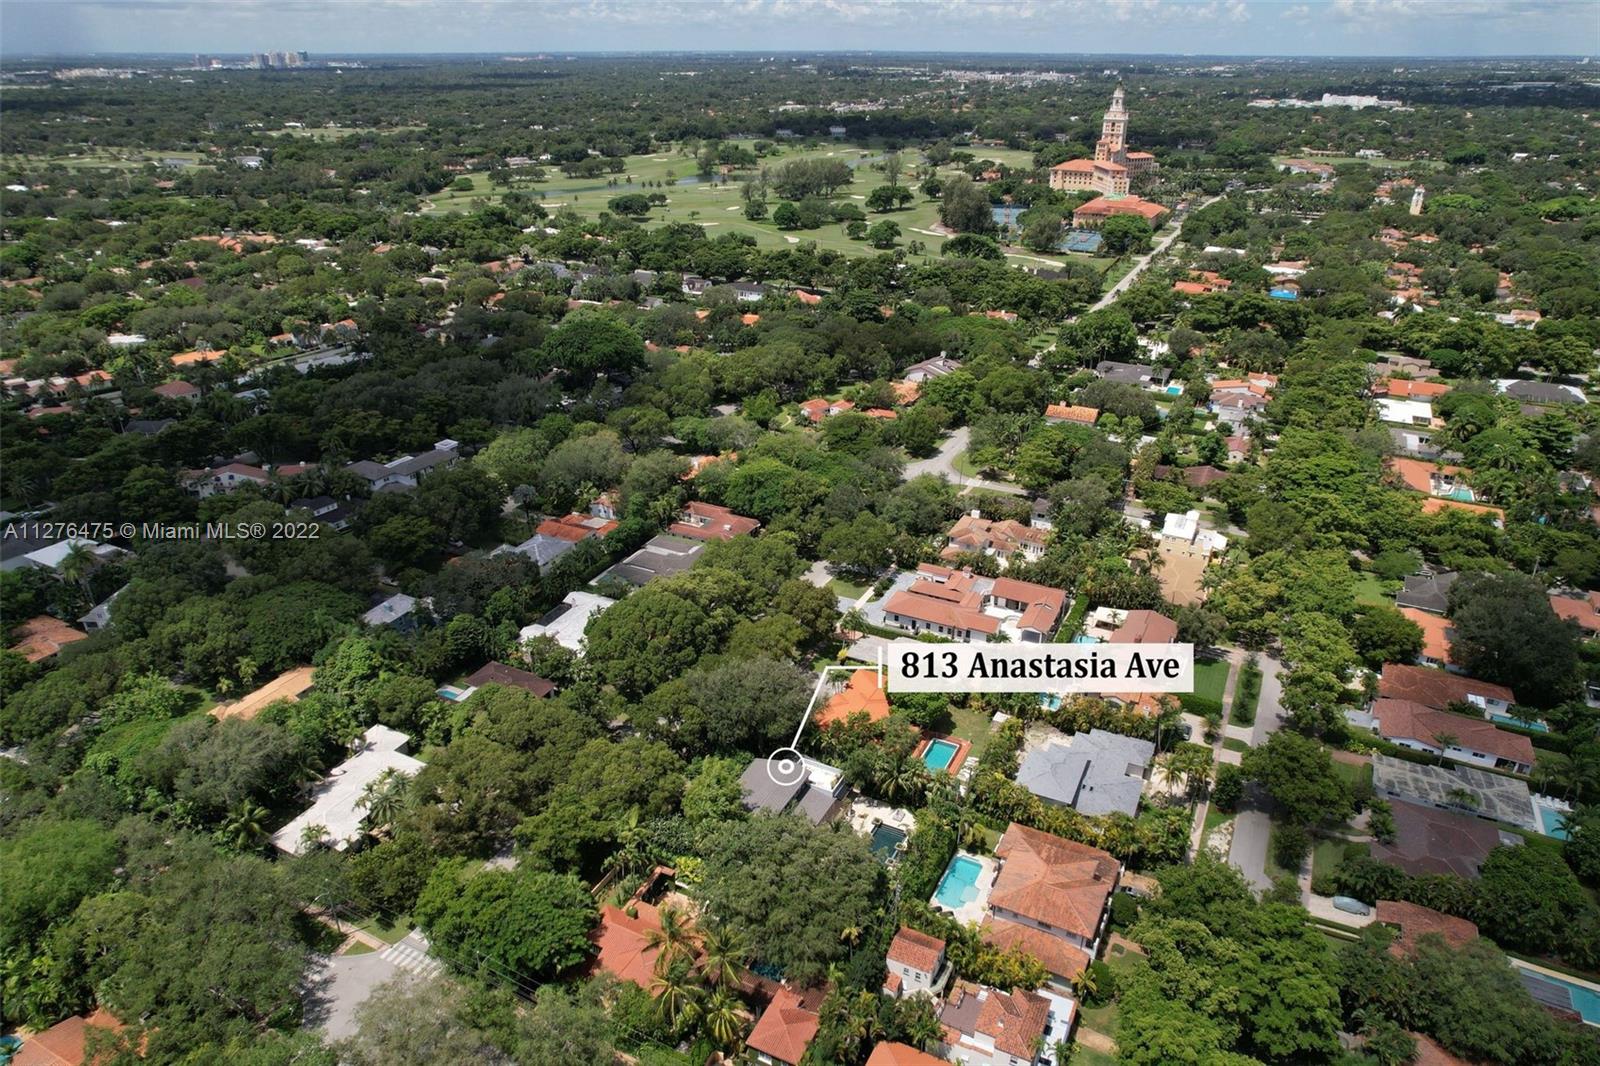 Photo 2 of 813 Anastasia Ave in Coral Gables - MLS A11276475